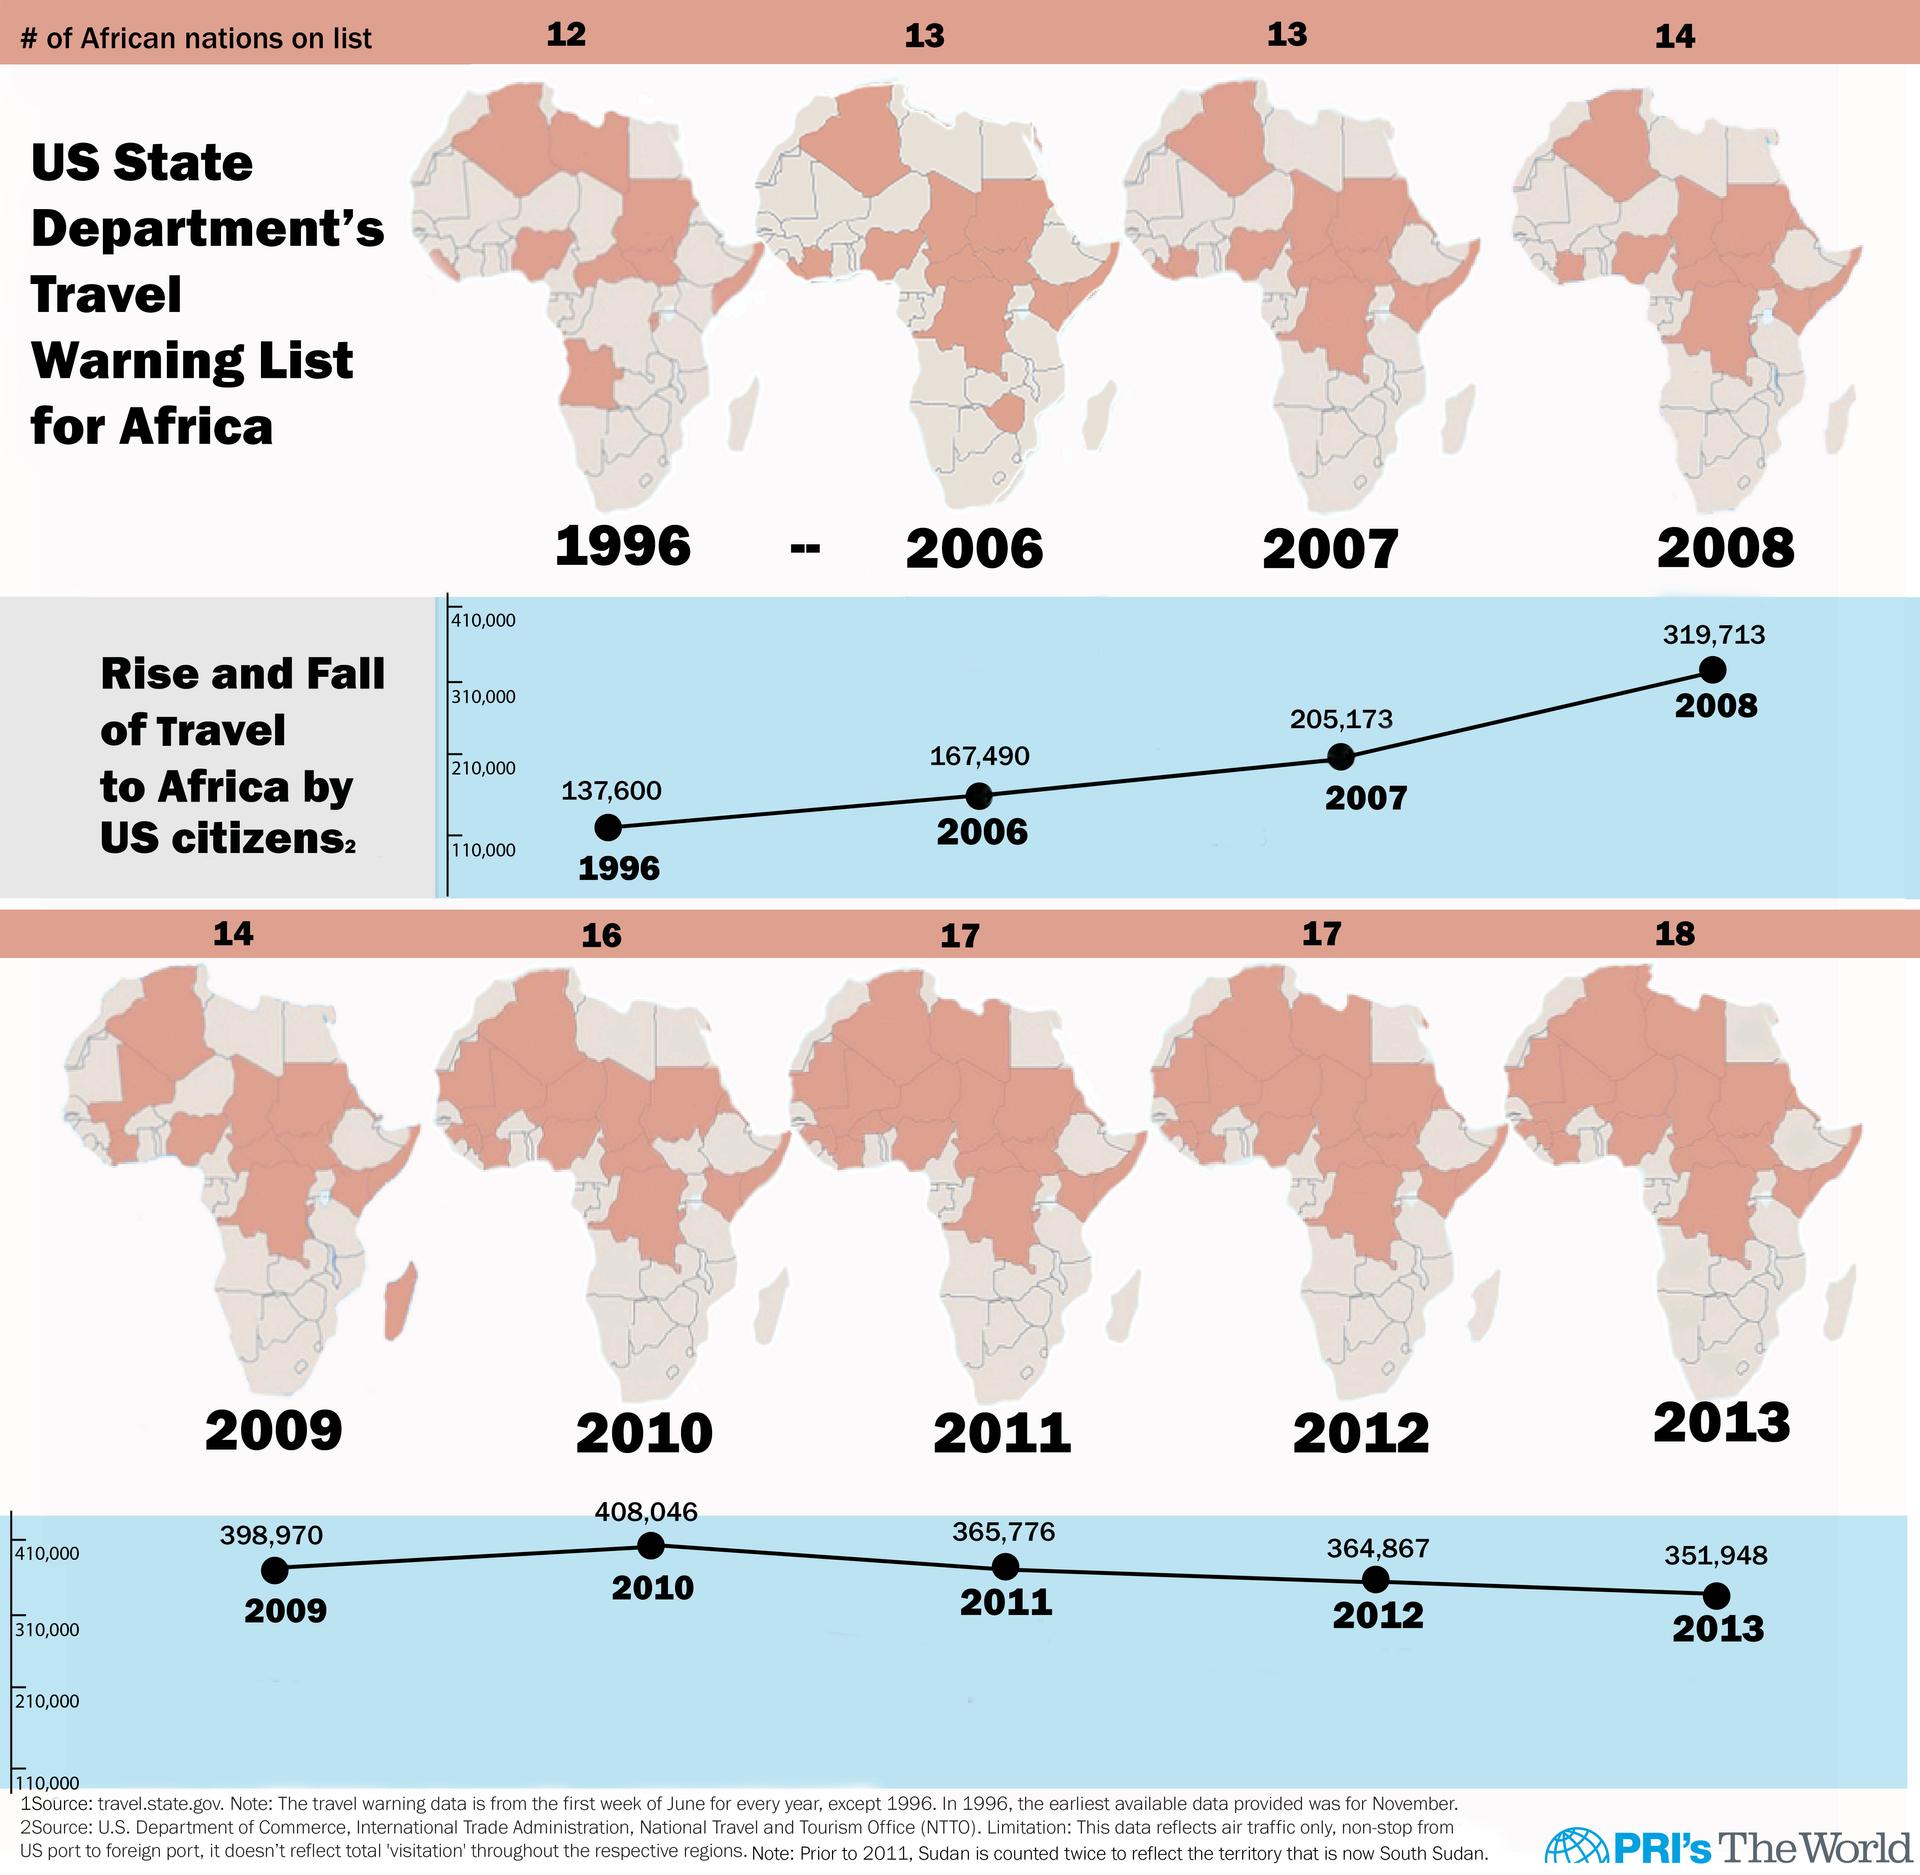 US Travel Warnings for Africa since 1996